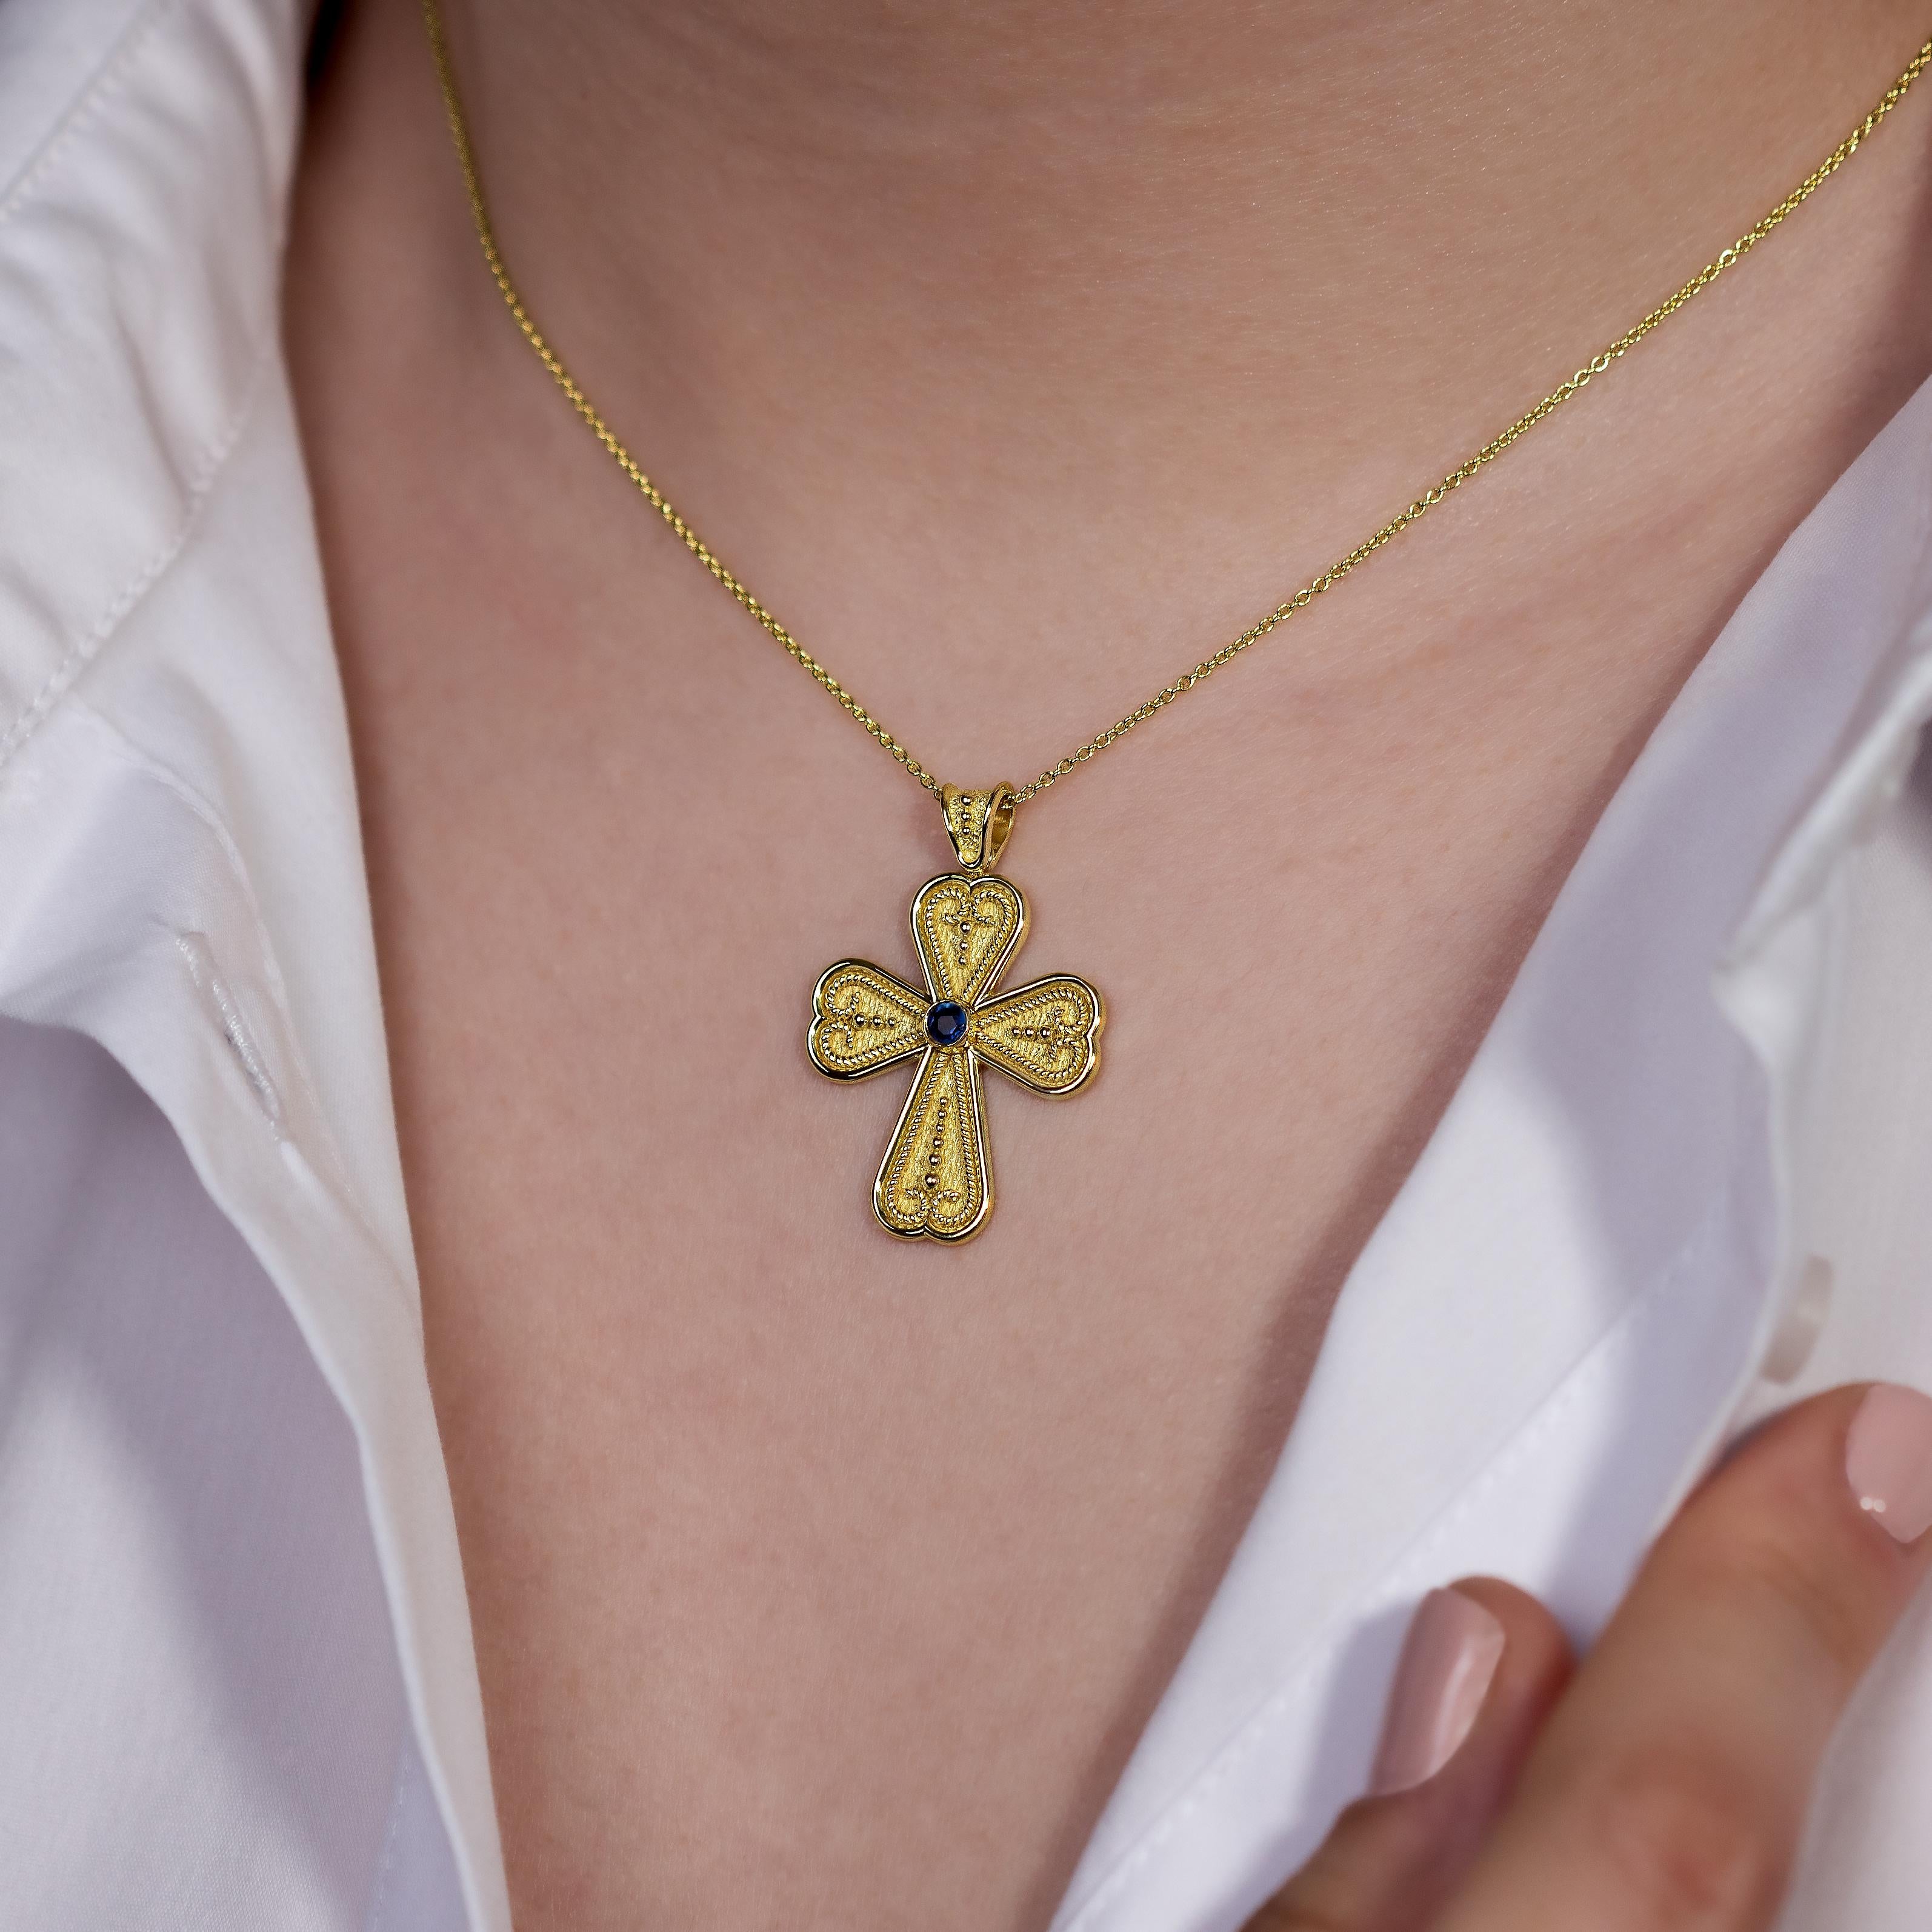 Grace your neckline with the captivating beauty of a Byzantine heart cross pendant, centered around a single, resplendent sapphire—a cherished symbol of enduring love and intricate artistry that transcends time.

100% handmade in our